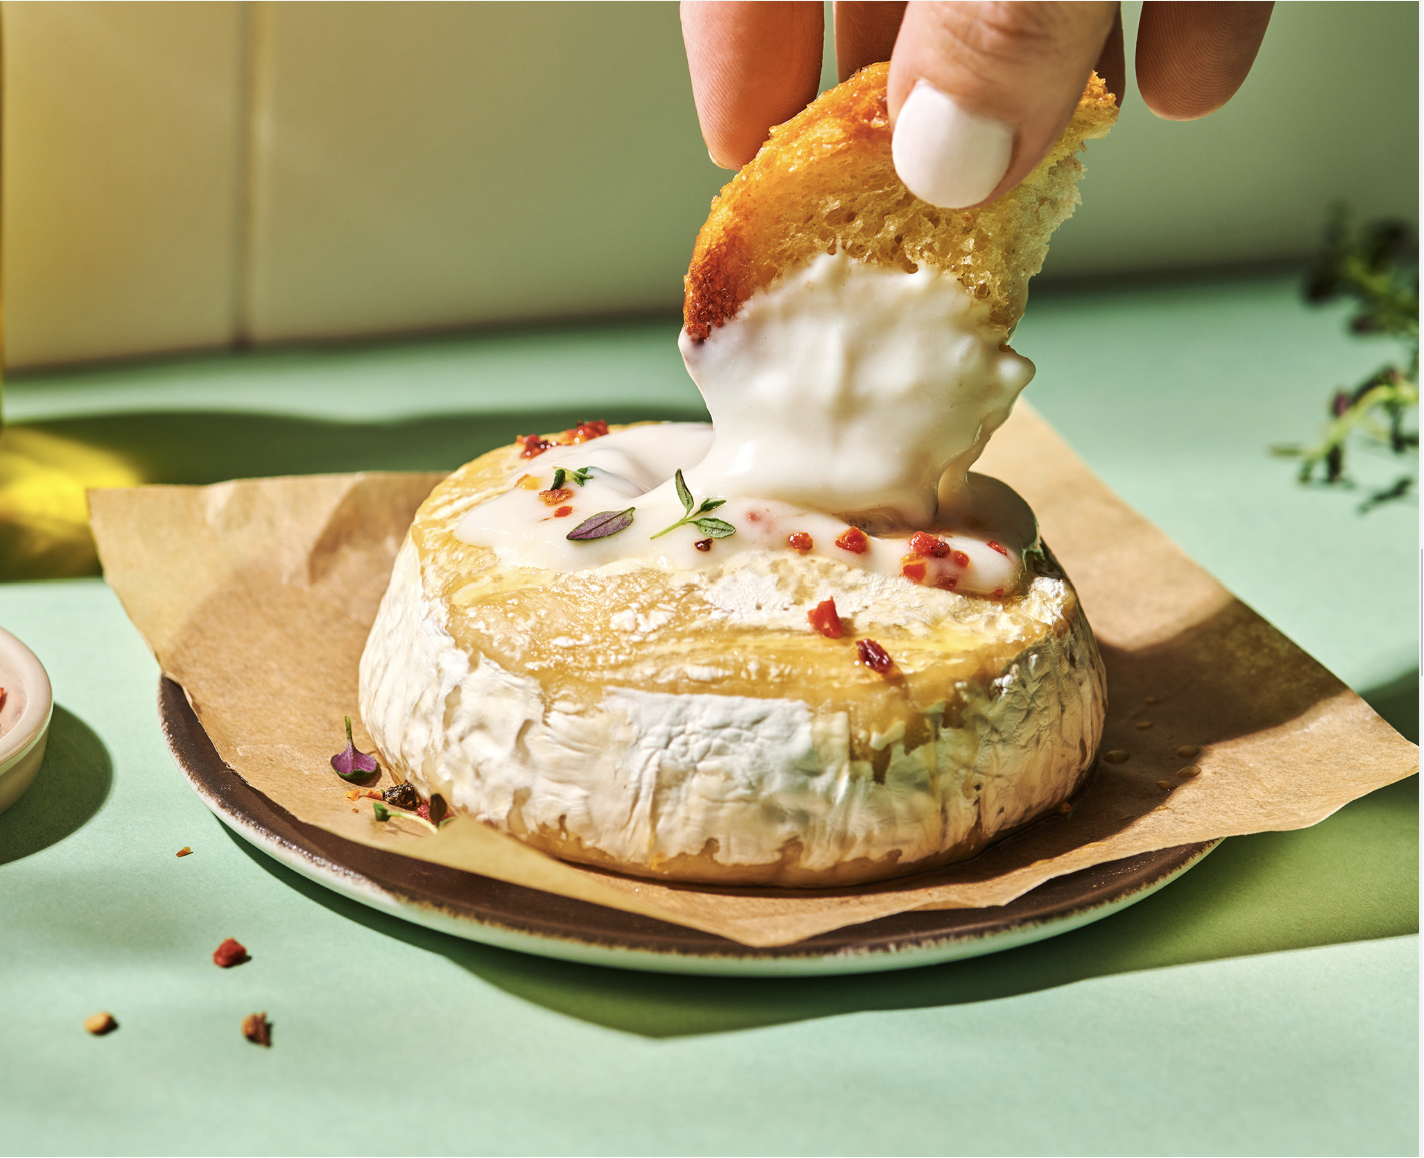 Mondarella Oven Blanc The winter classic from the oven, reinterpreted: 100% plant-based, 100% natural.
Wonderfully creamy and perfect with cranberries, for dipping with warm bread or with a fresh salad.